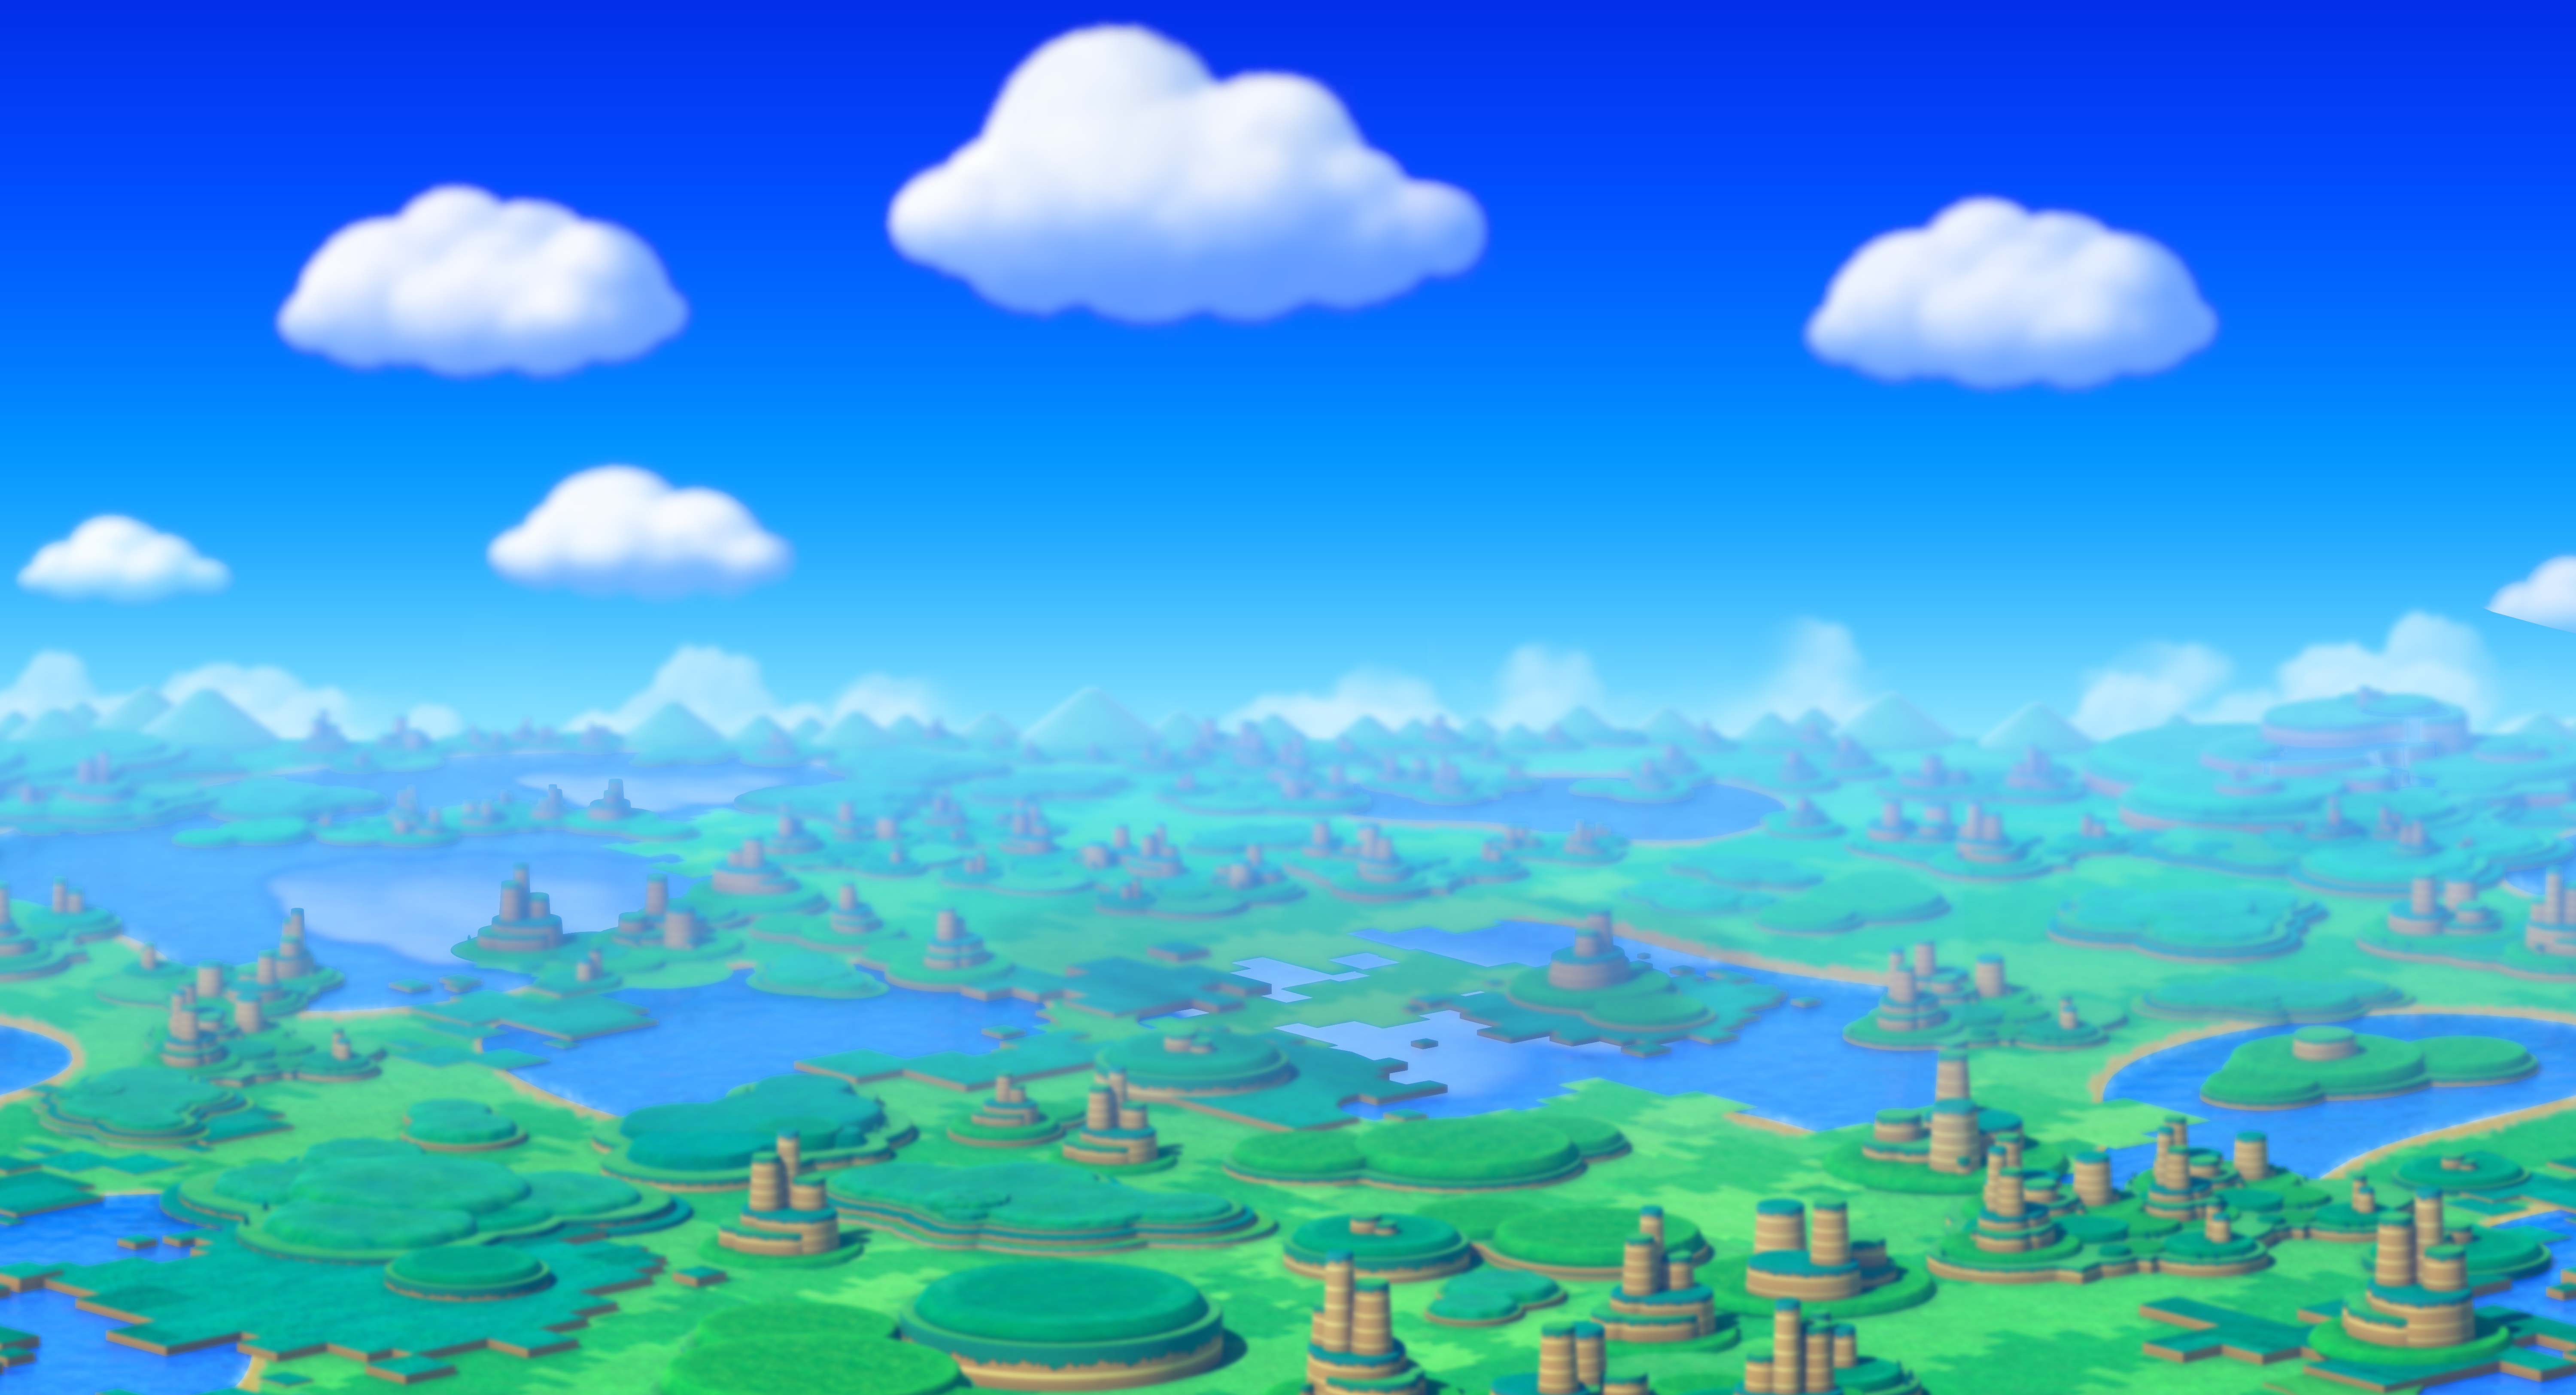 https://vignette1.wikia.nocookie.net/sonic/images/2/2c/Windy_Hill_Background_%28Sonic_Lost_World_Japanese_Website%29.jpg/revision/latest?cb=20151229175150